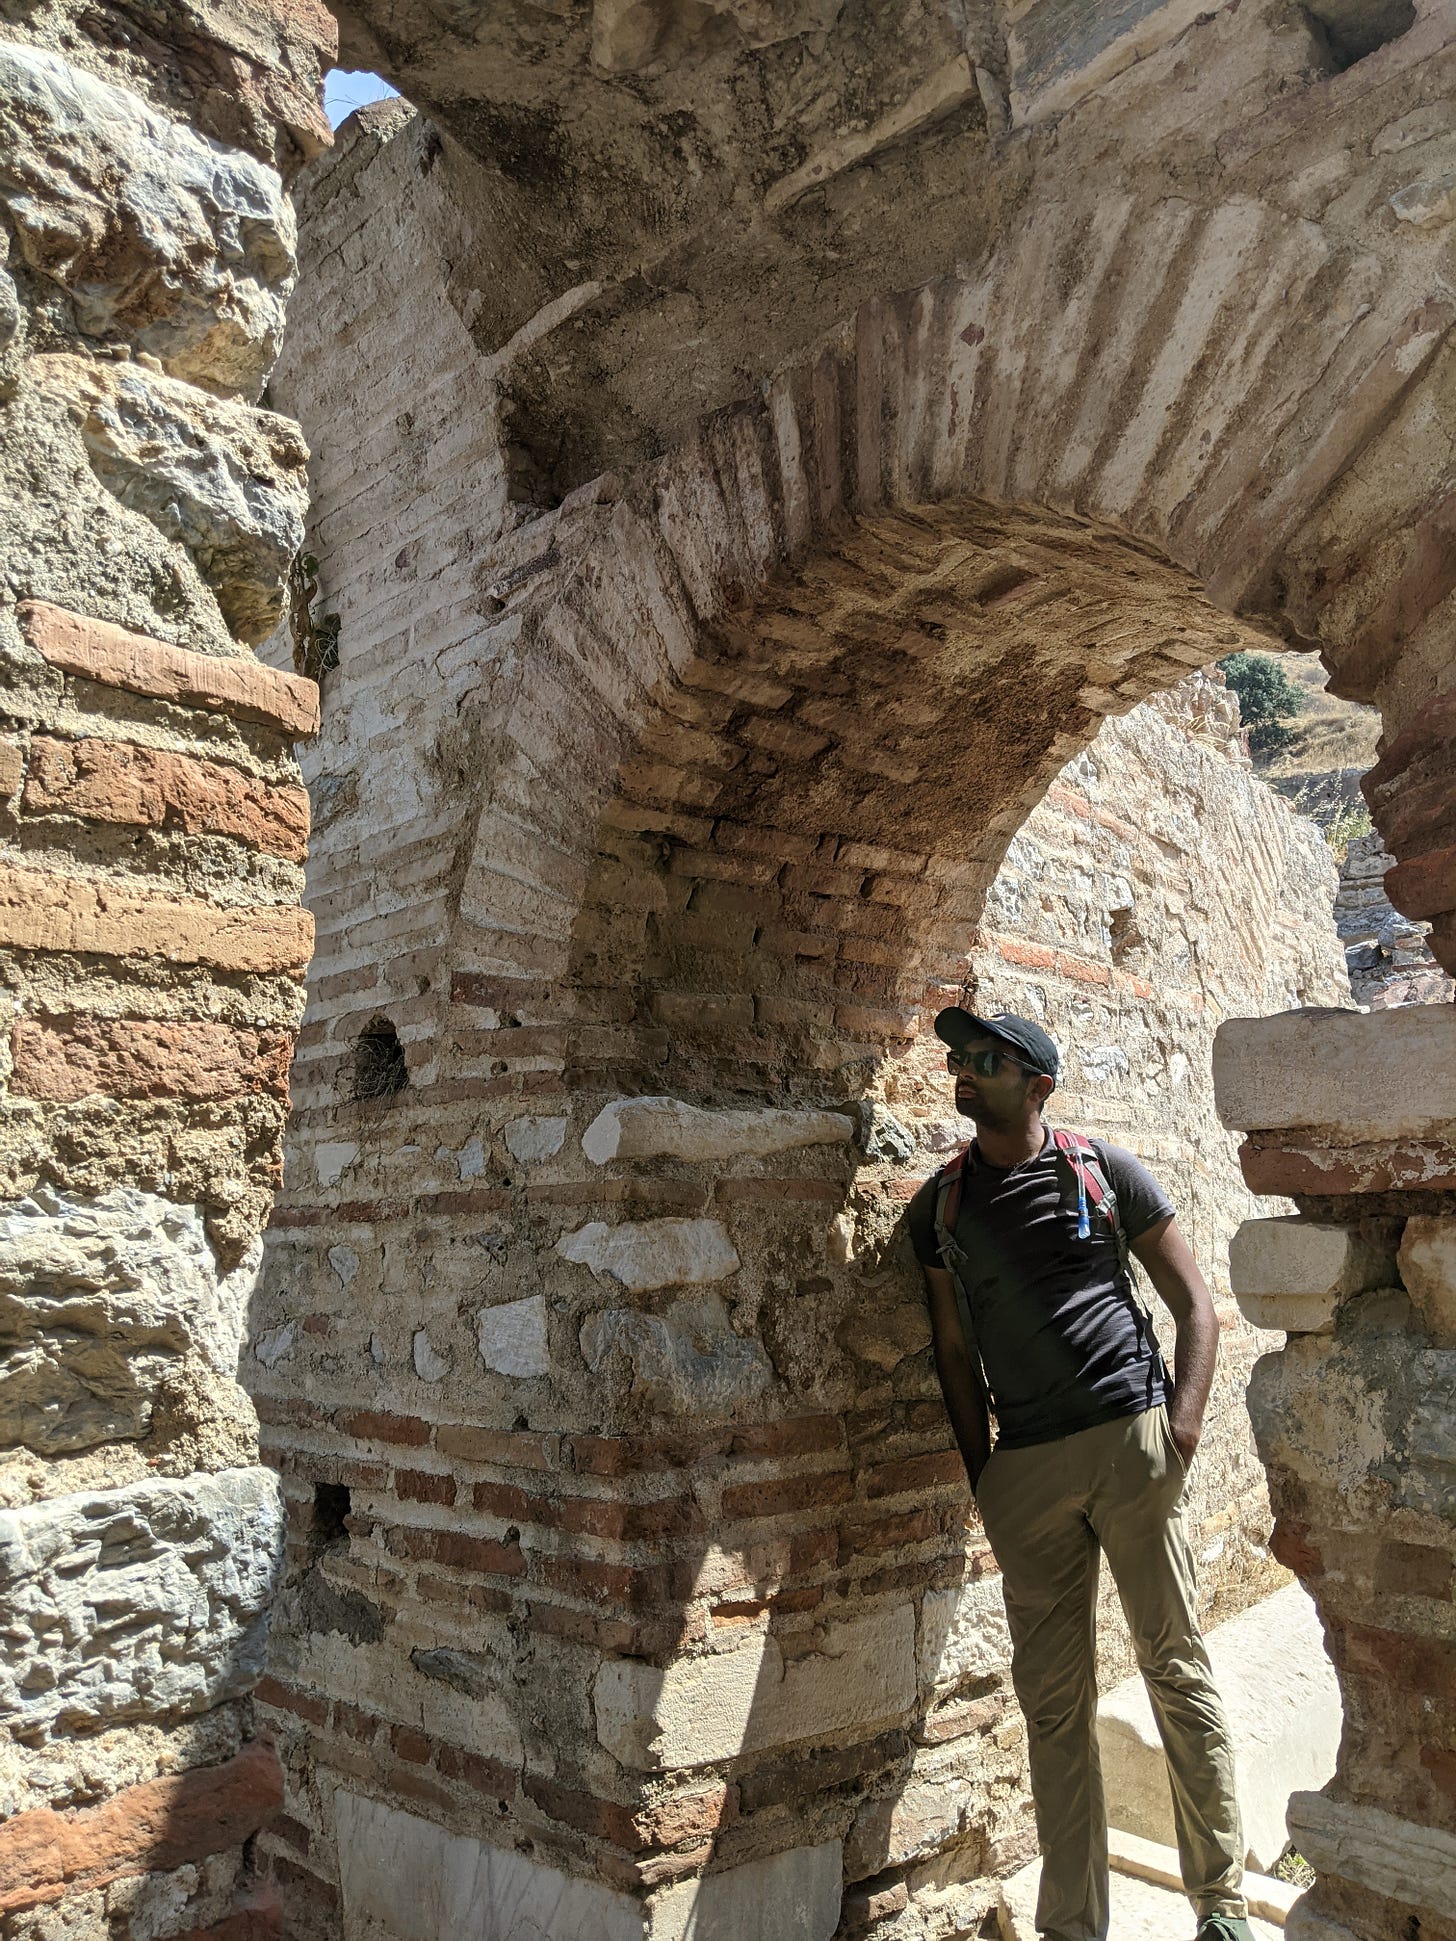 Aseef leaning against an ancient archway in Ephesus that contains Byzantine, Roman and Greek components